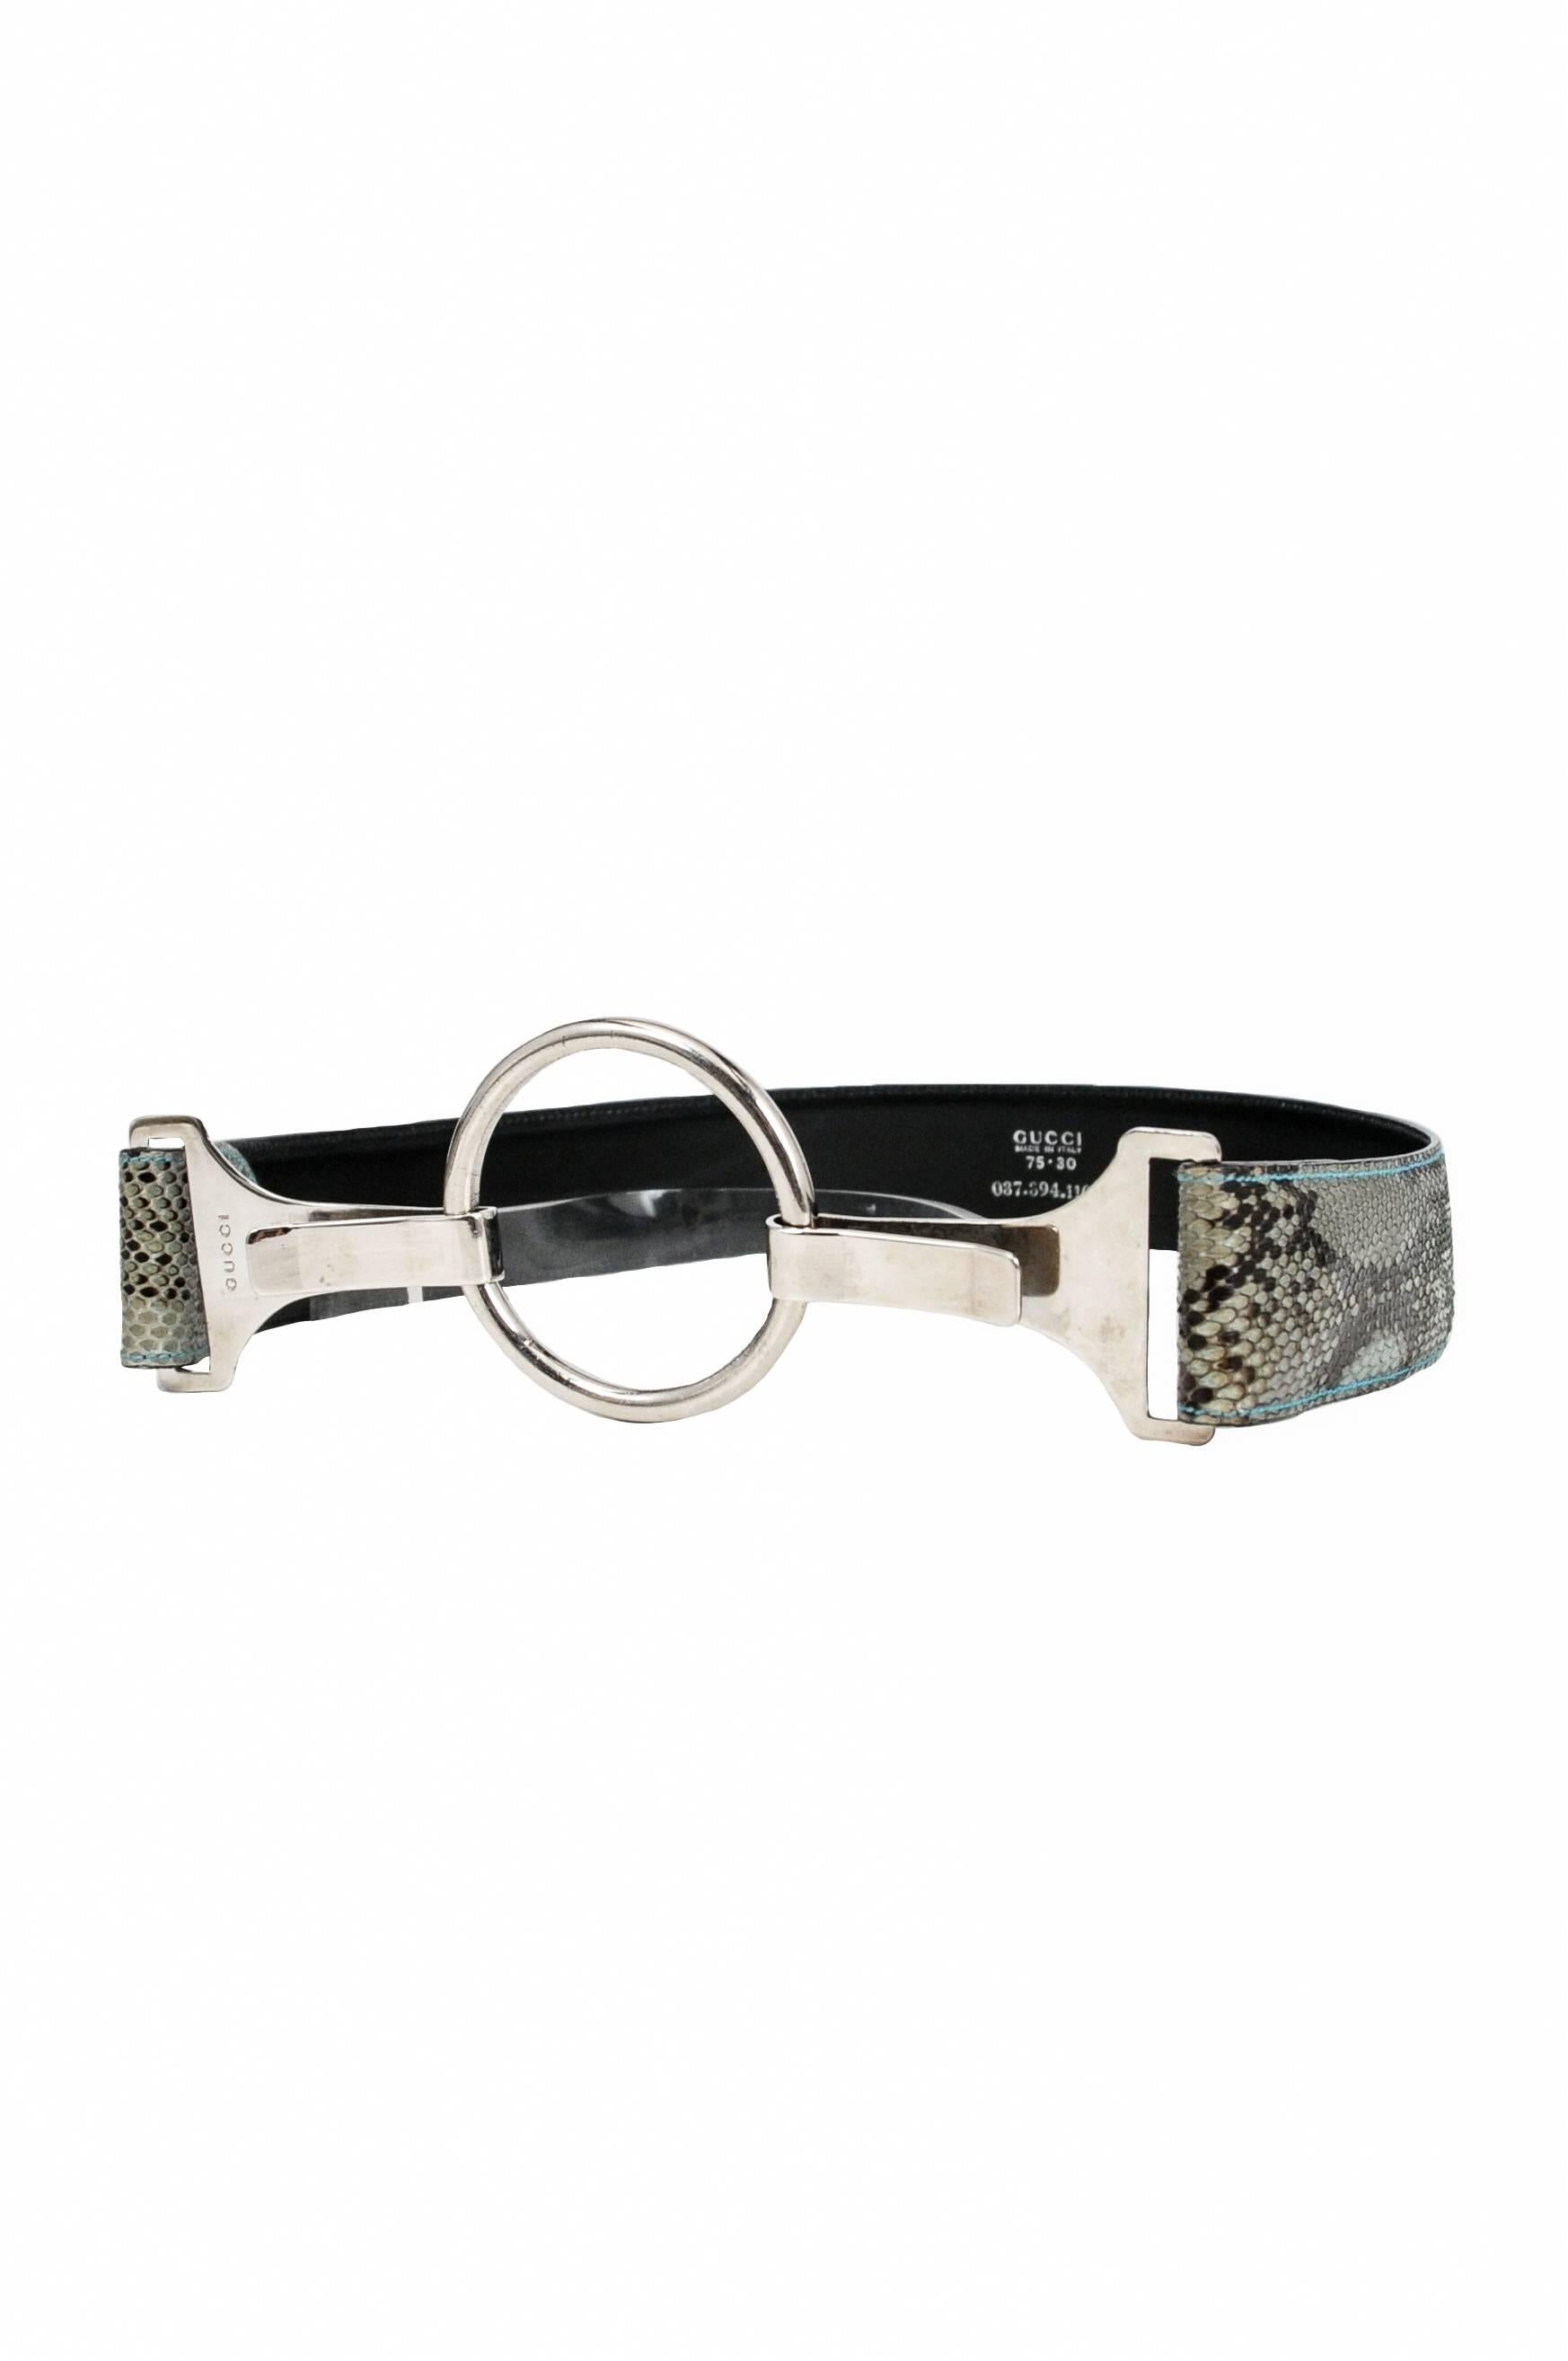 Vintage Tom Ford for Gucci blue snakeskin belt with silver metal colored hardware.
Please inquire for additional images.